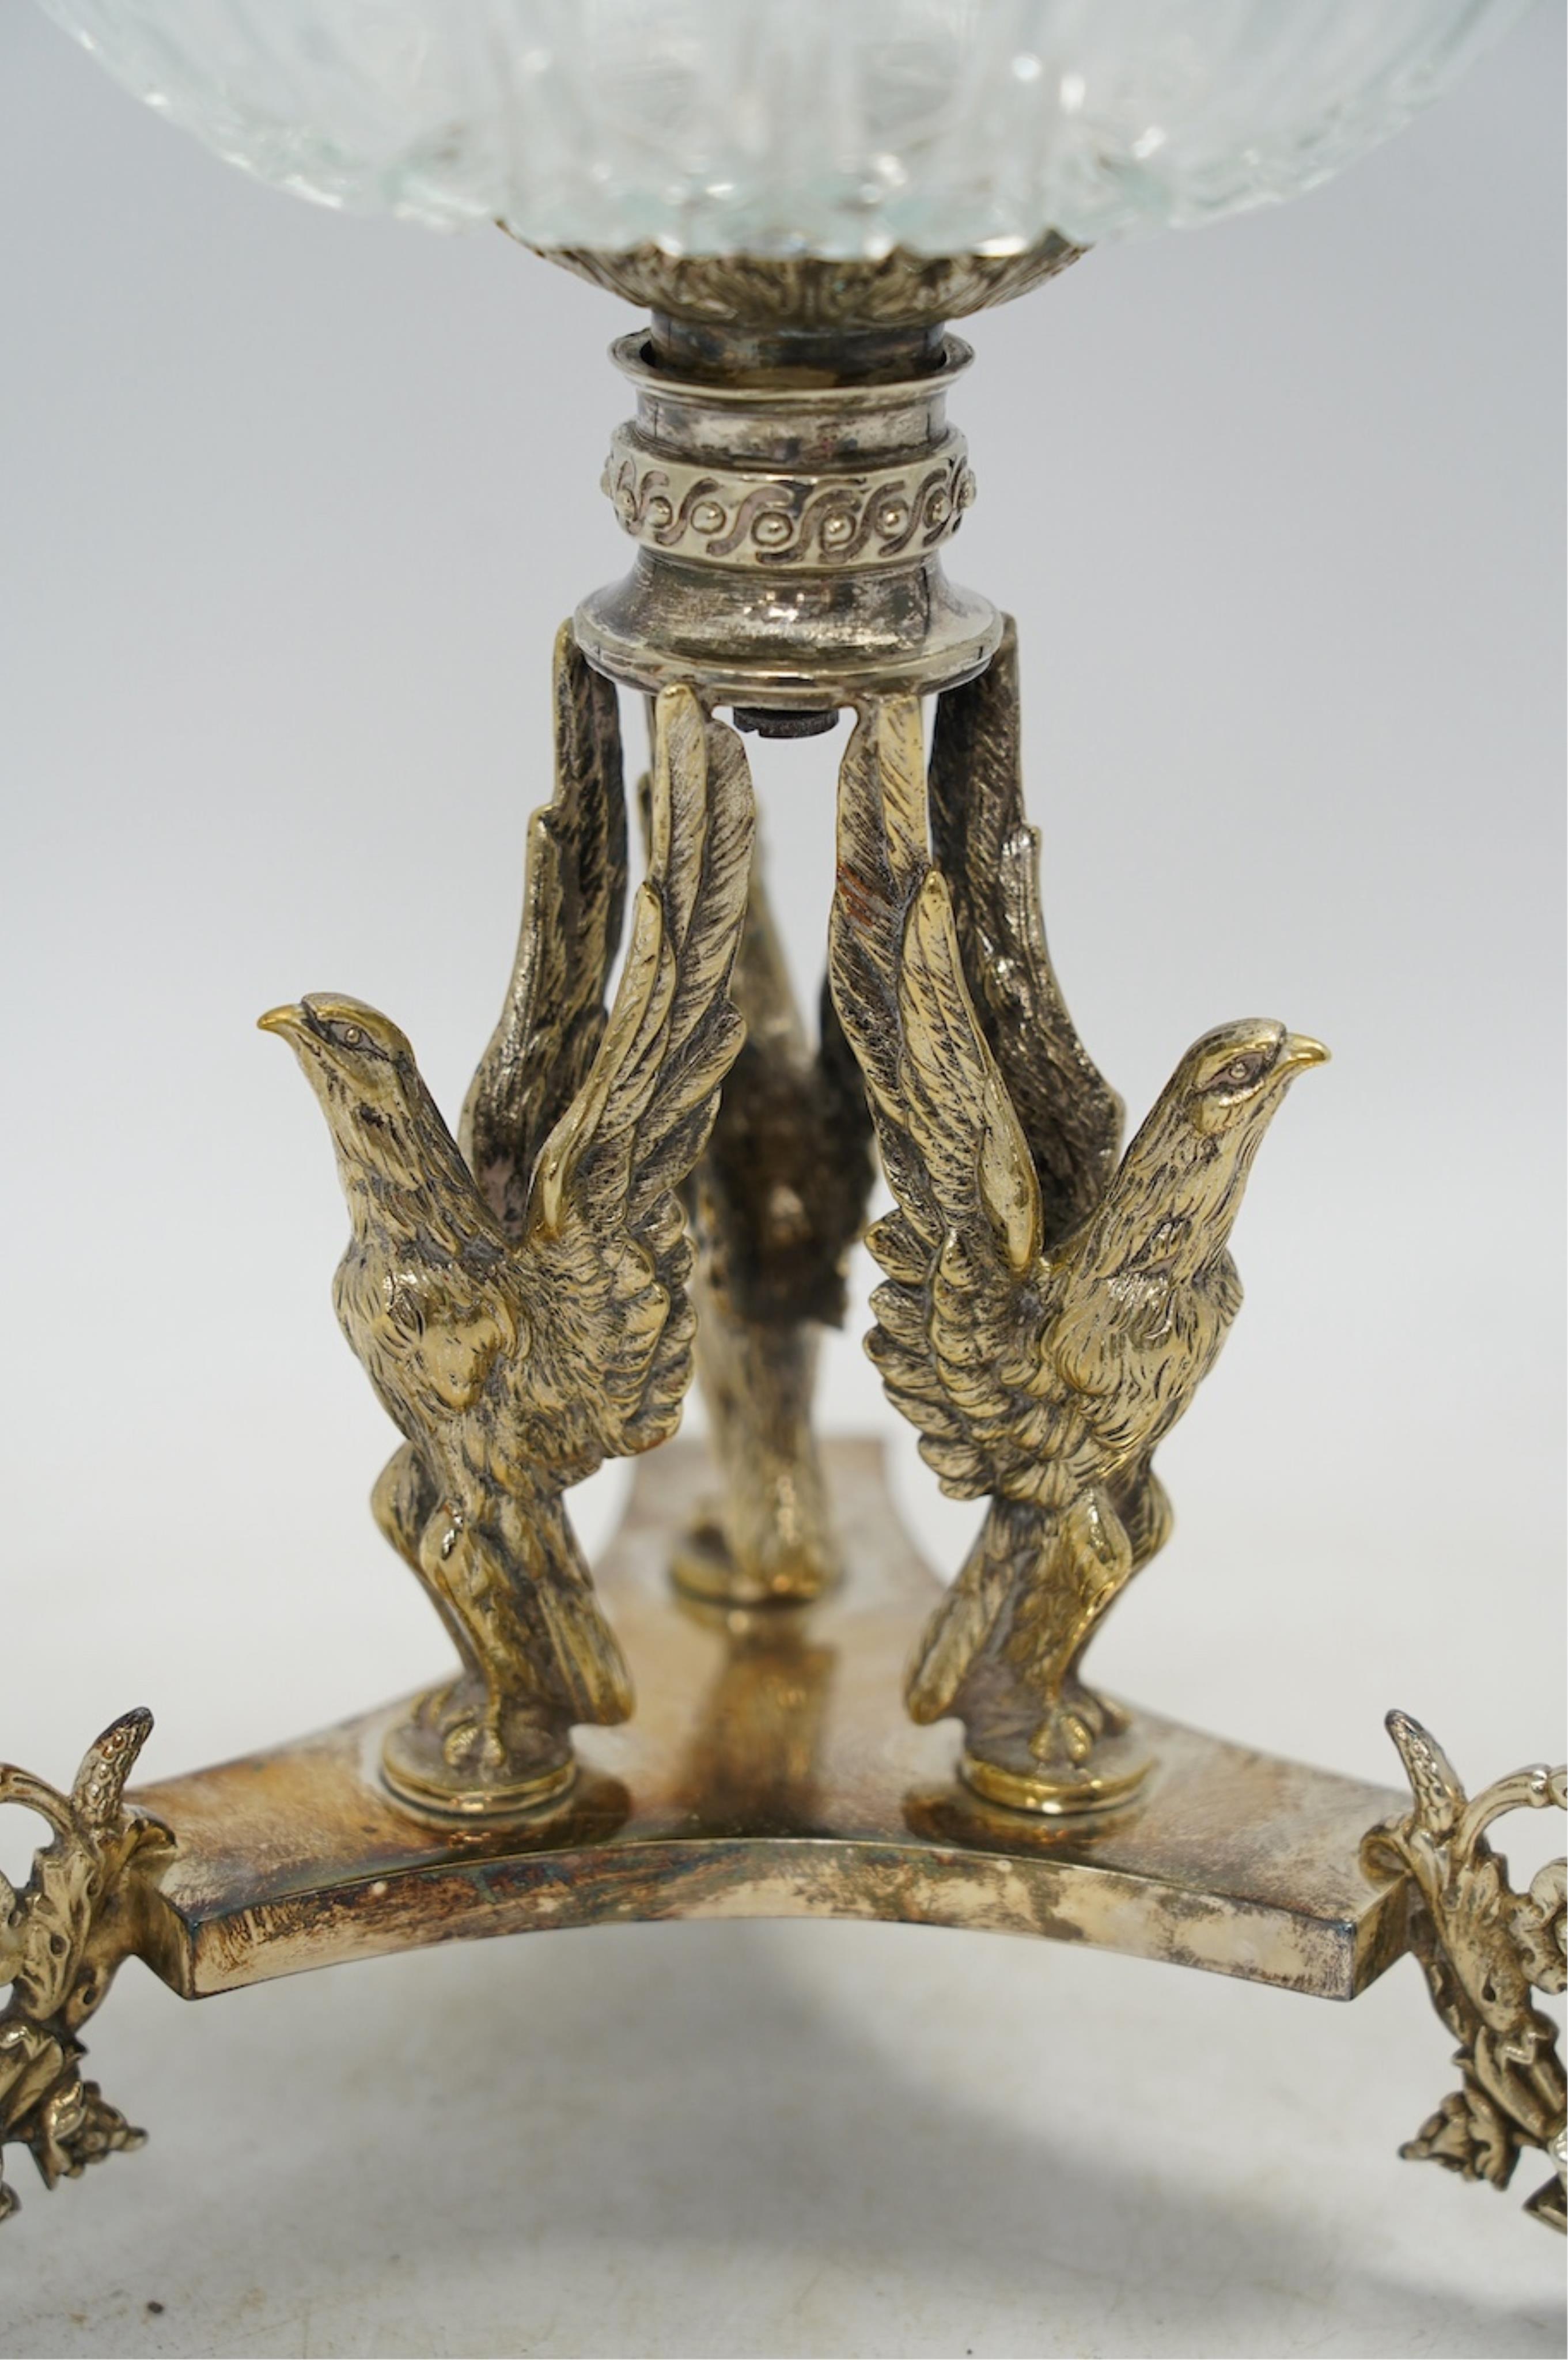 A Victorian electroplated centrepiece with pressed glass bowl, 26.5cm high. Condition - good